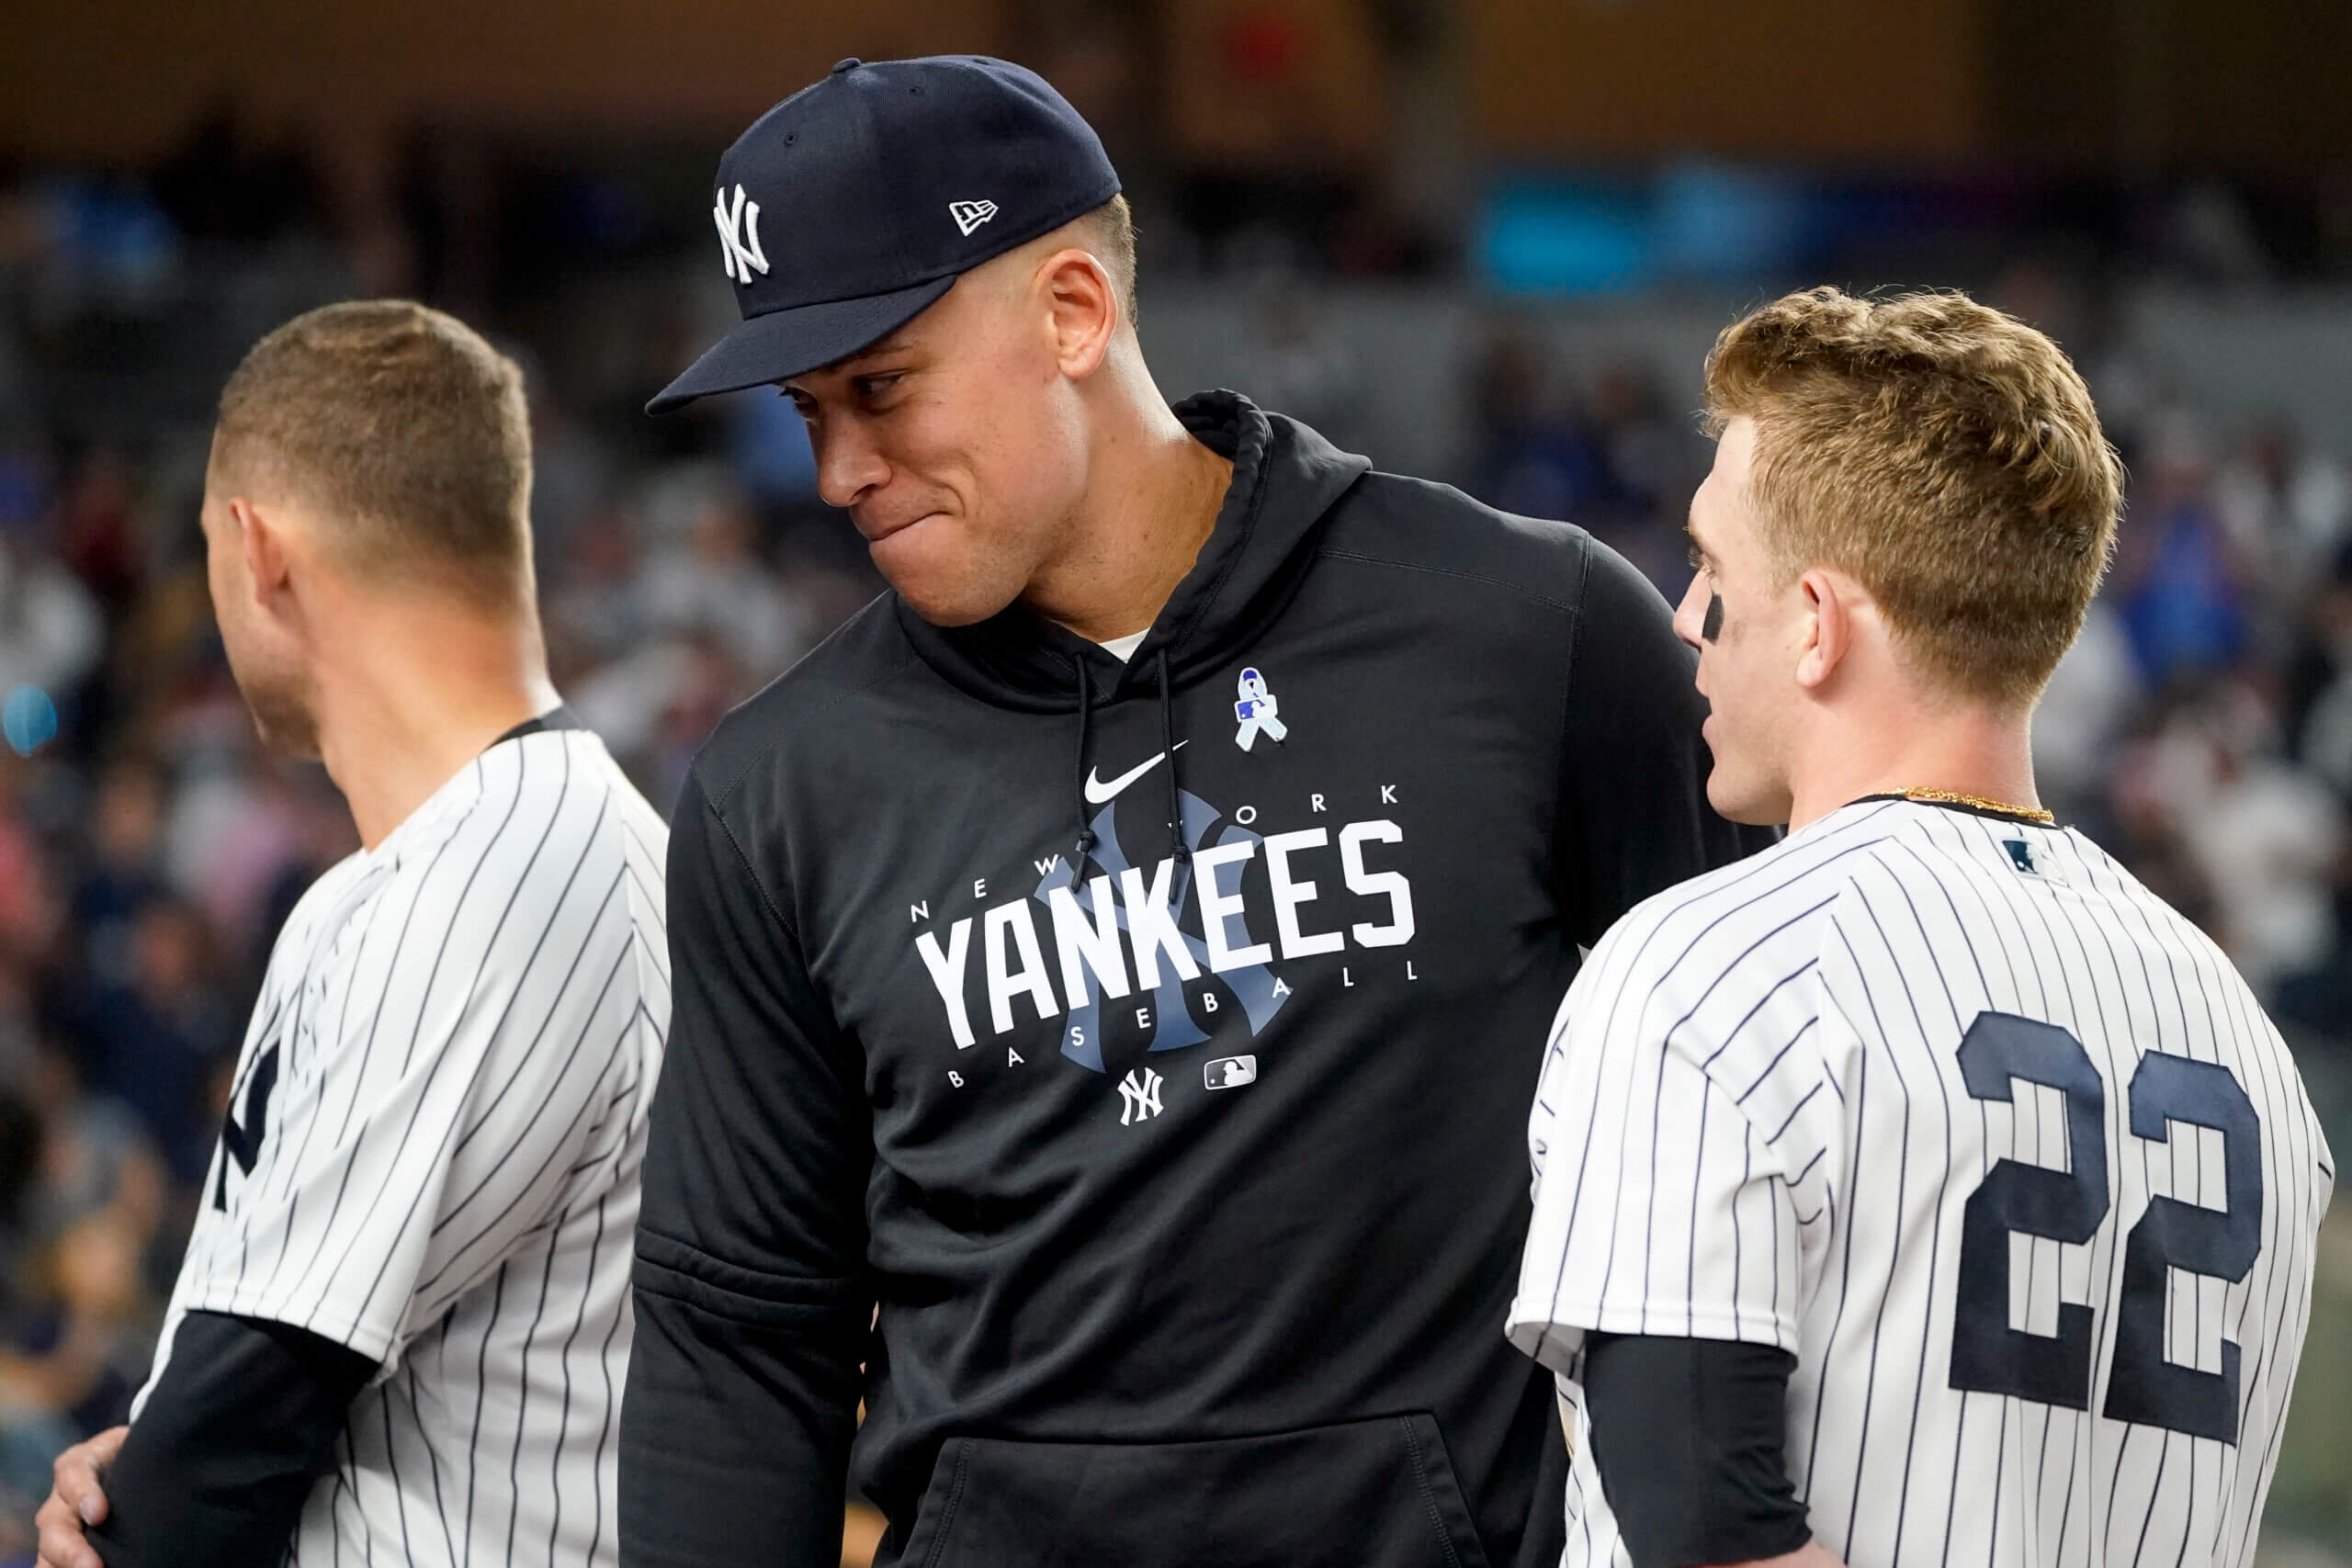 New York Yankees: Will star player Aaron Judge challenge the appearance  policy?